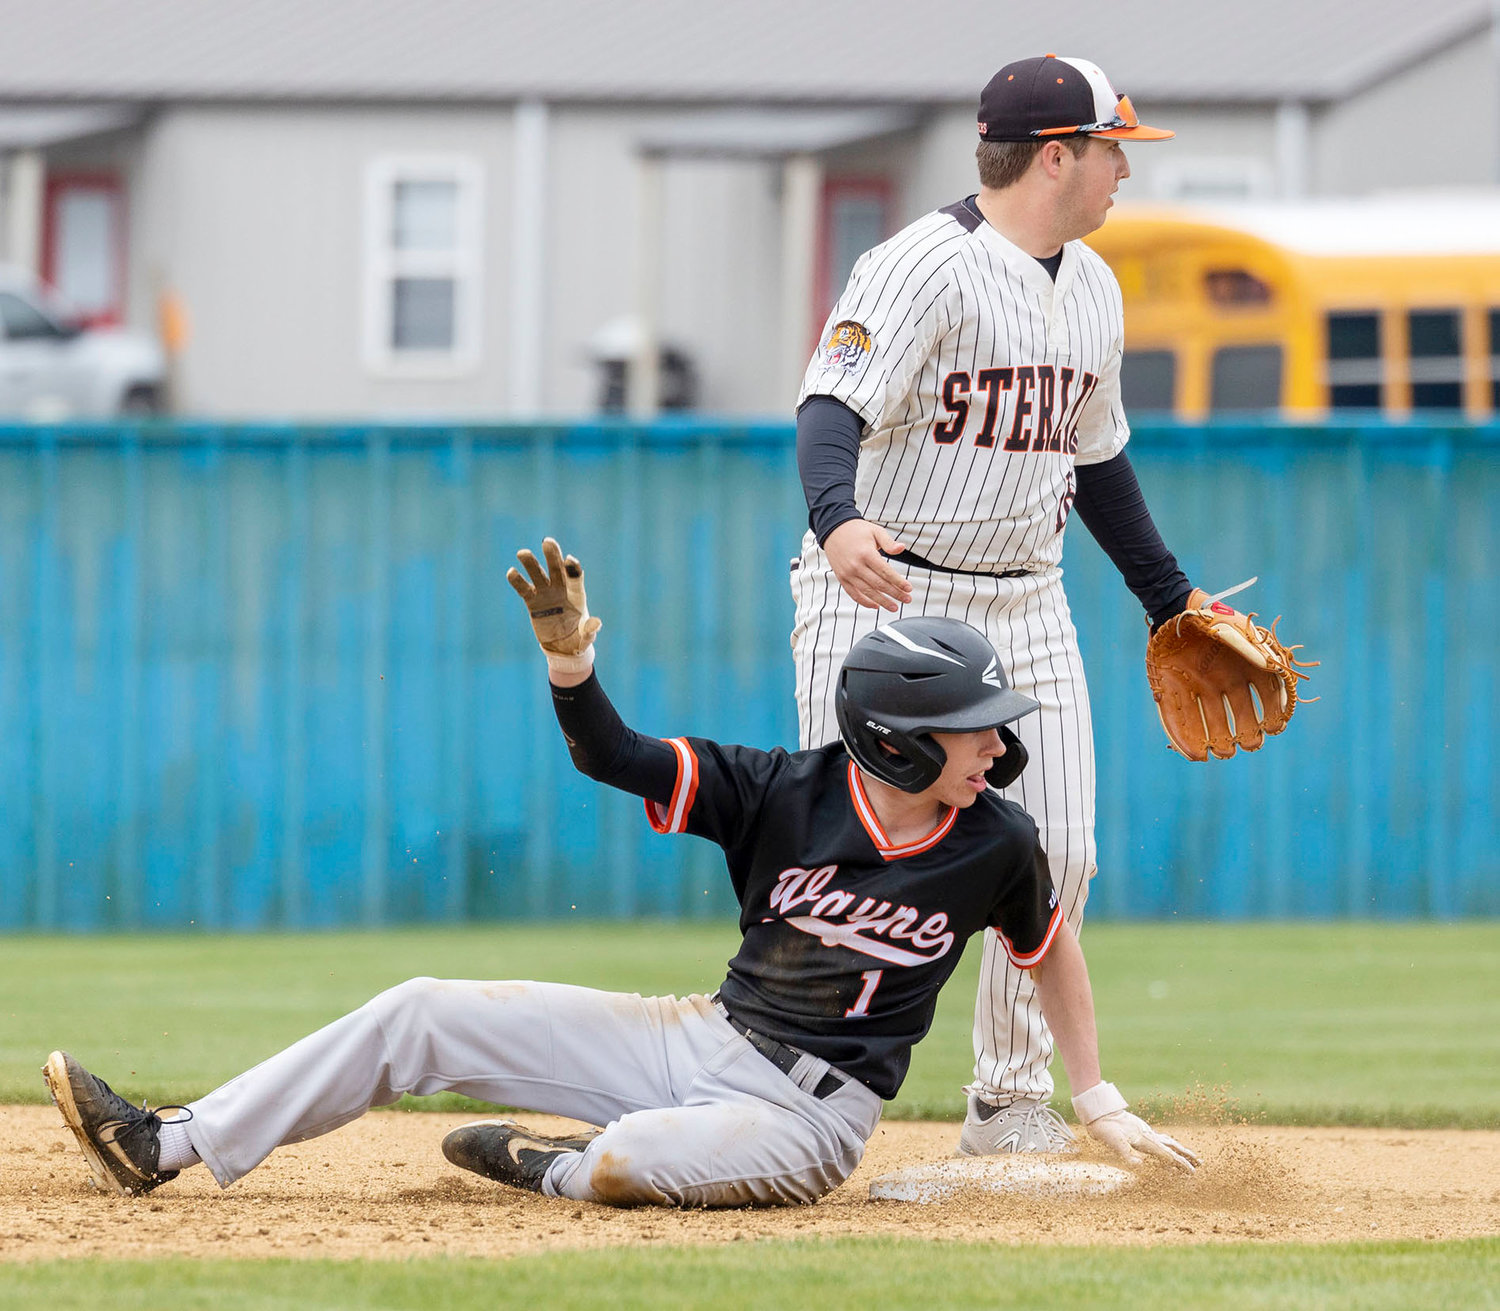 Wayne senior Kaleb Madden slides in safely to second base during the Bulldogs’ game against Sterling at the Dibble tournament. Wayne fell 11-0.